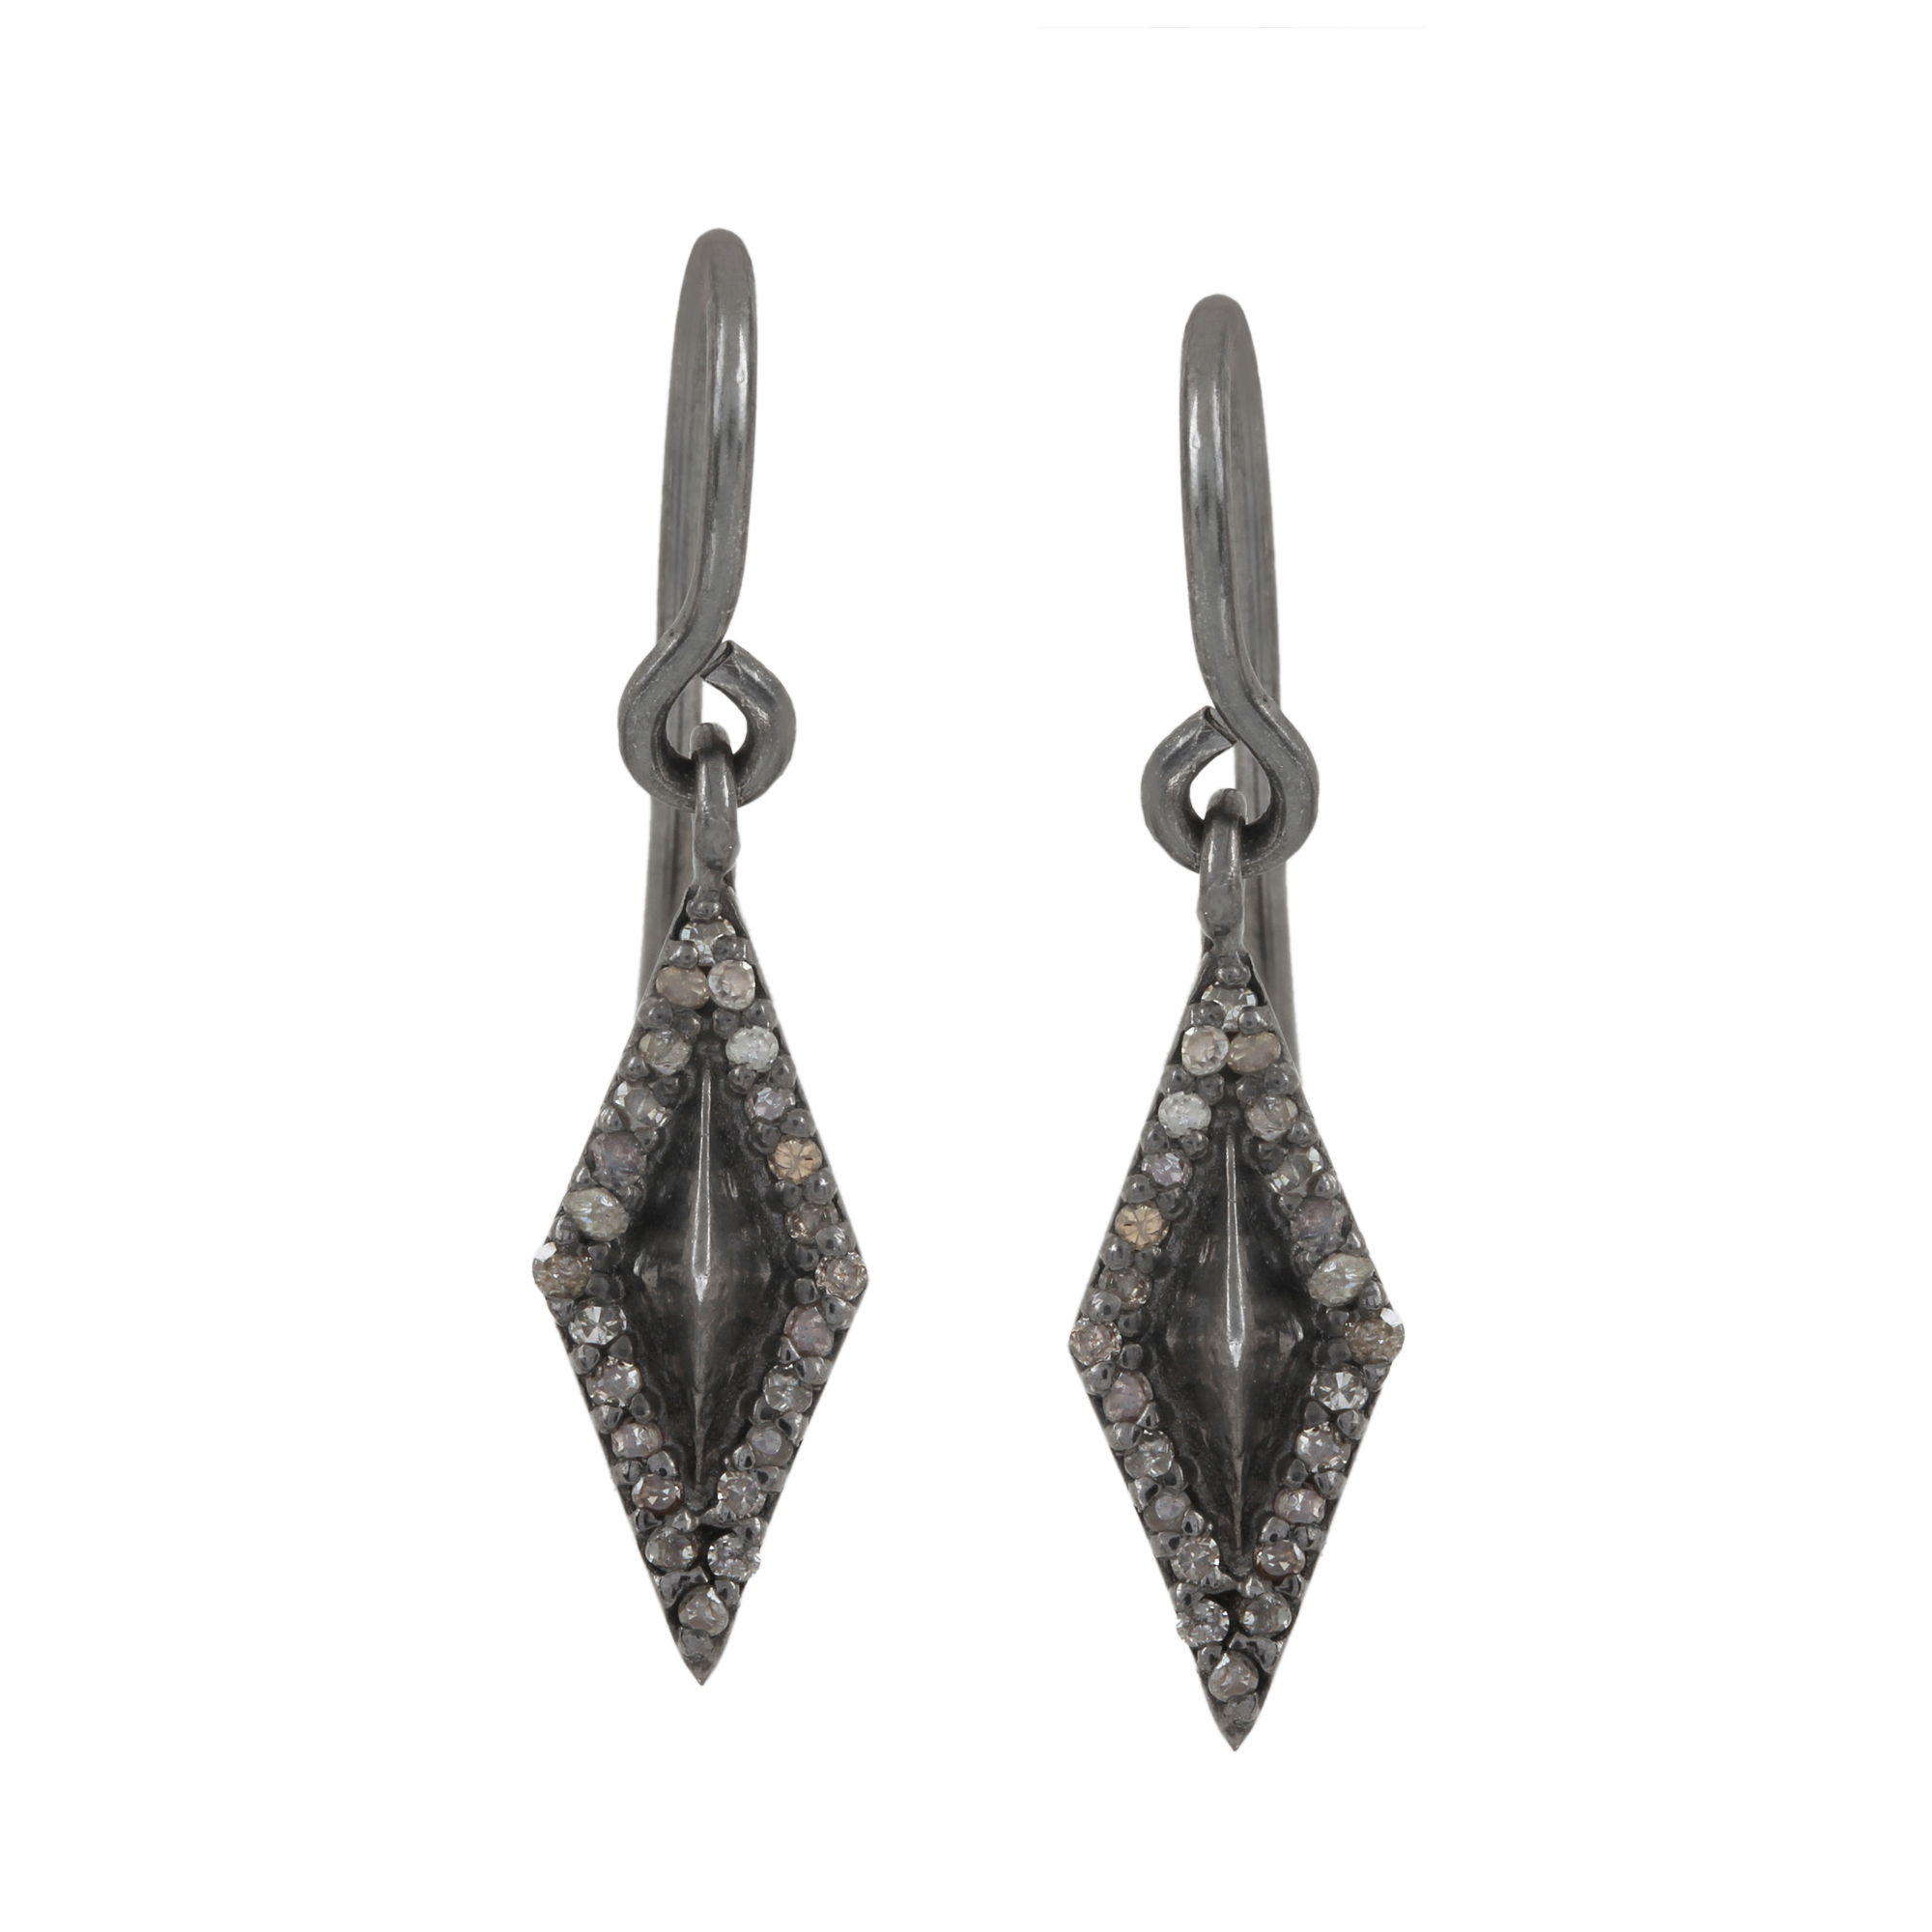 Natural diamond hook earrings made in 925 strling silver jewelry